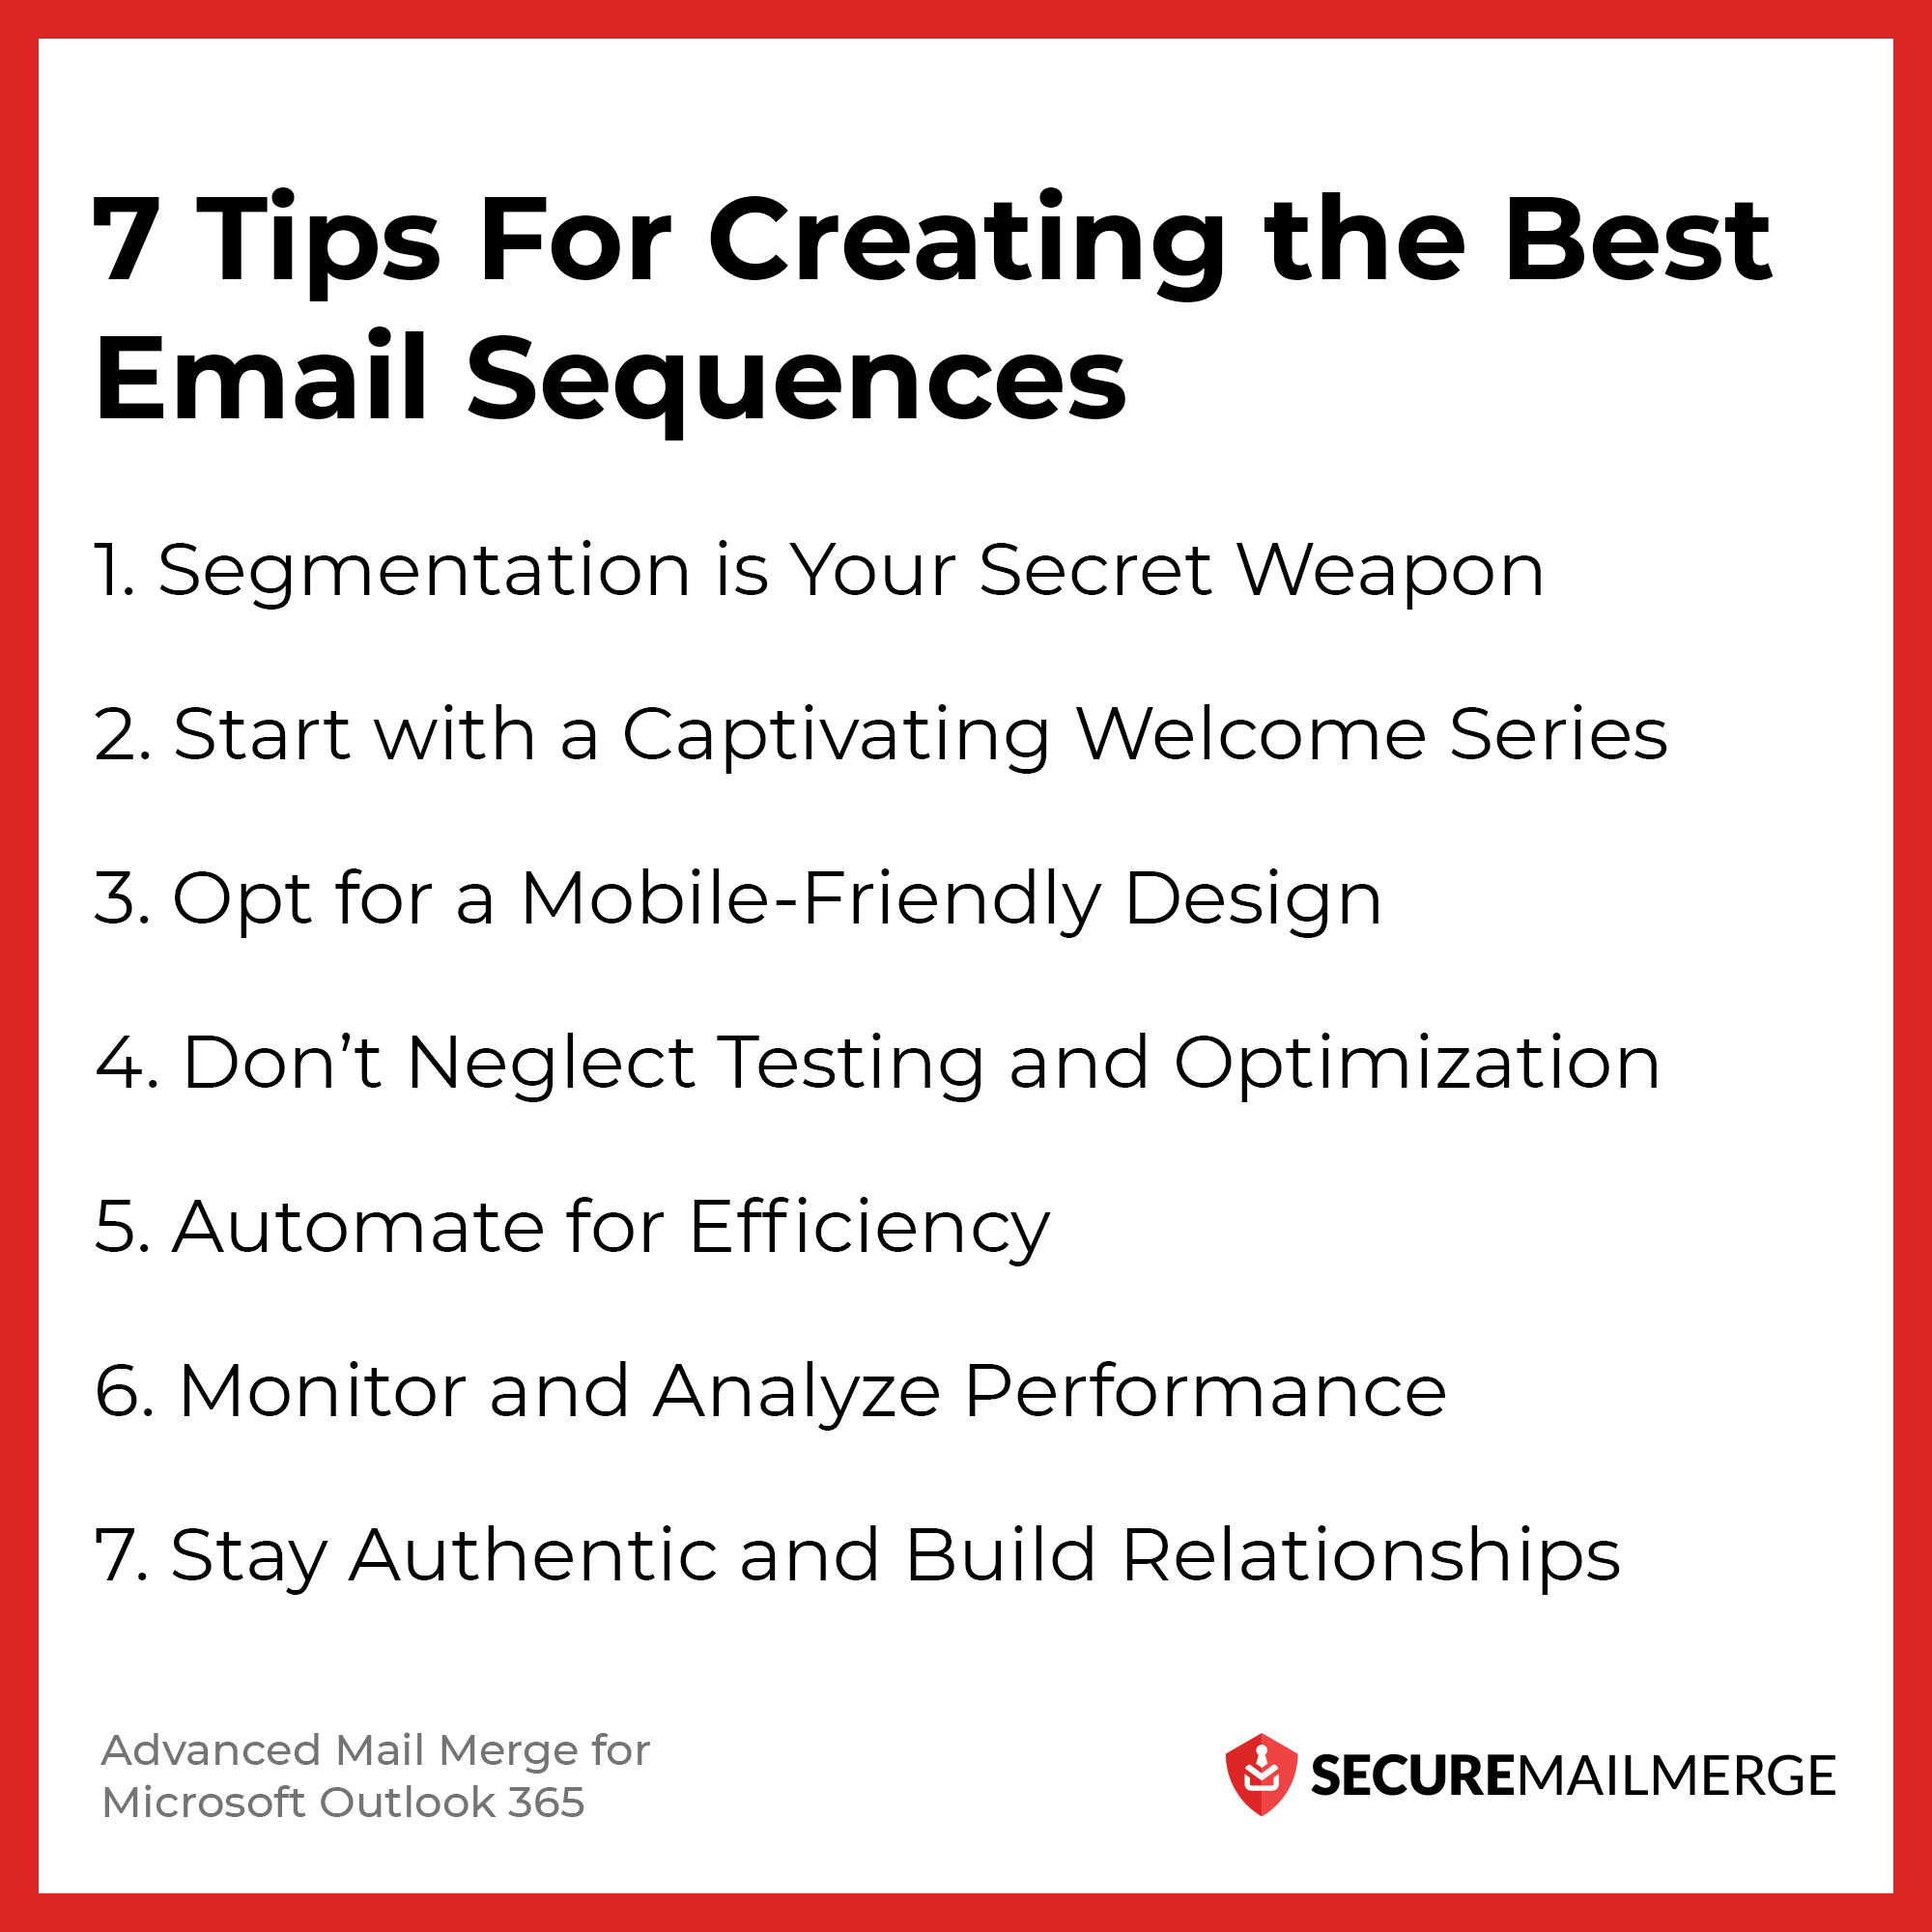 7 Tips For Creating the Best Email Sequences